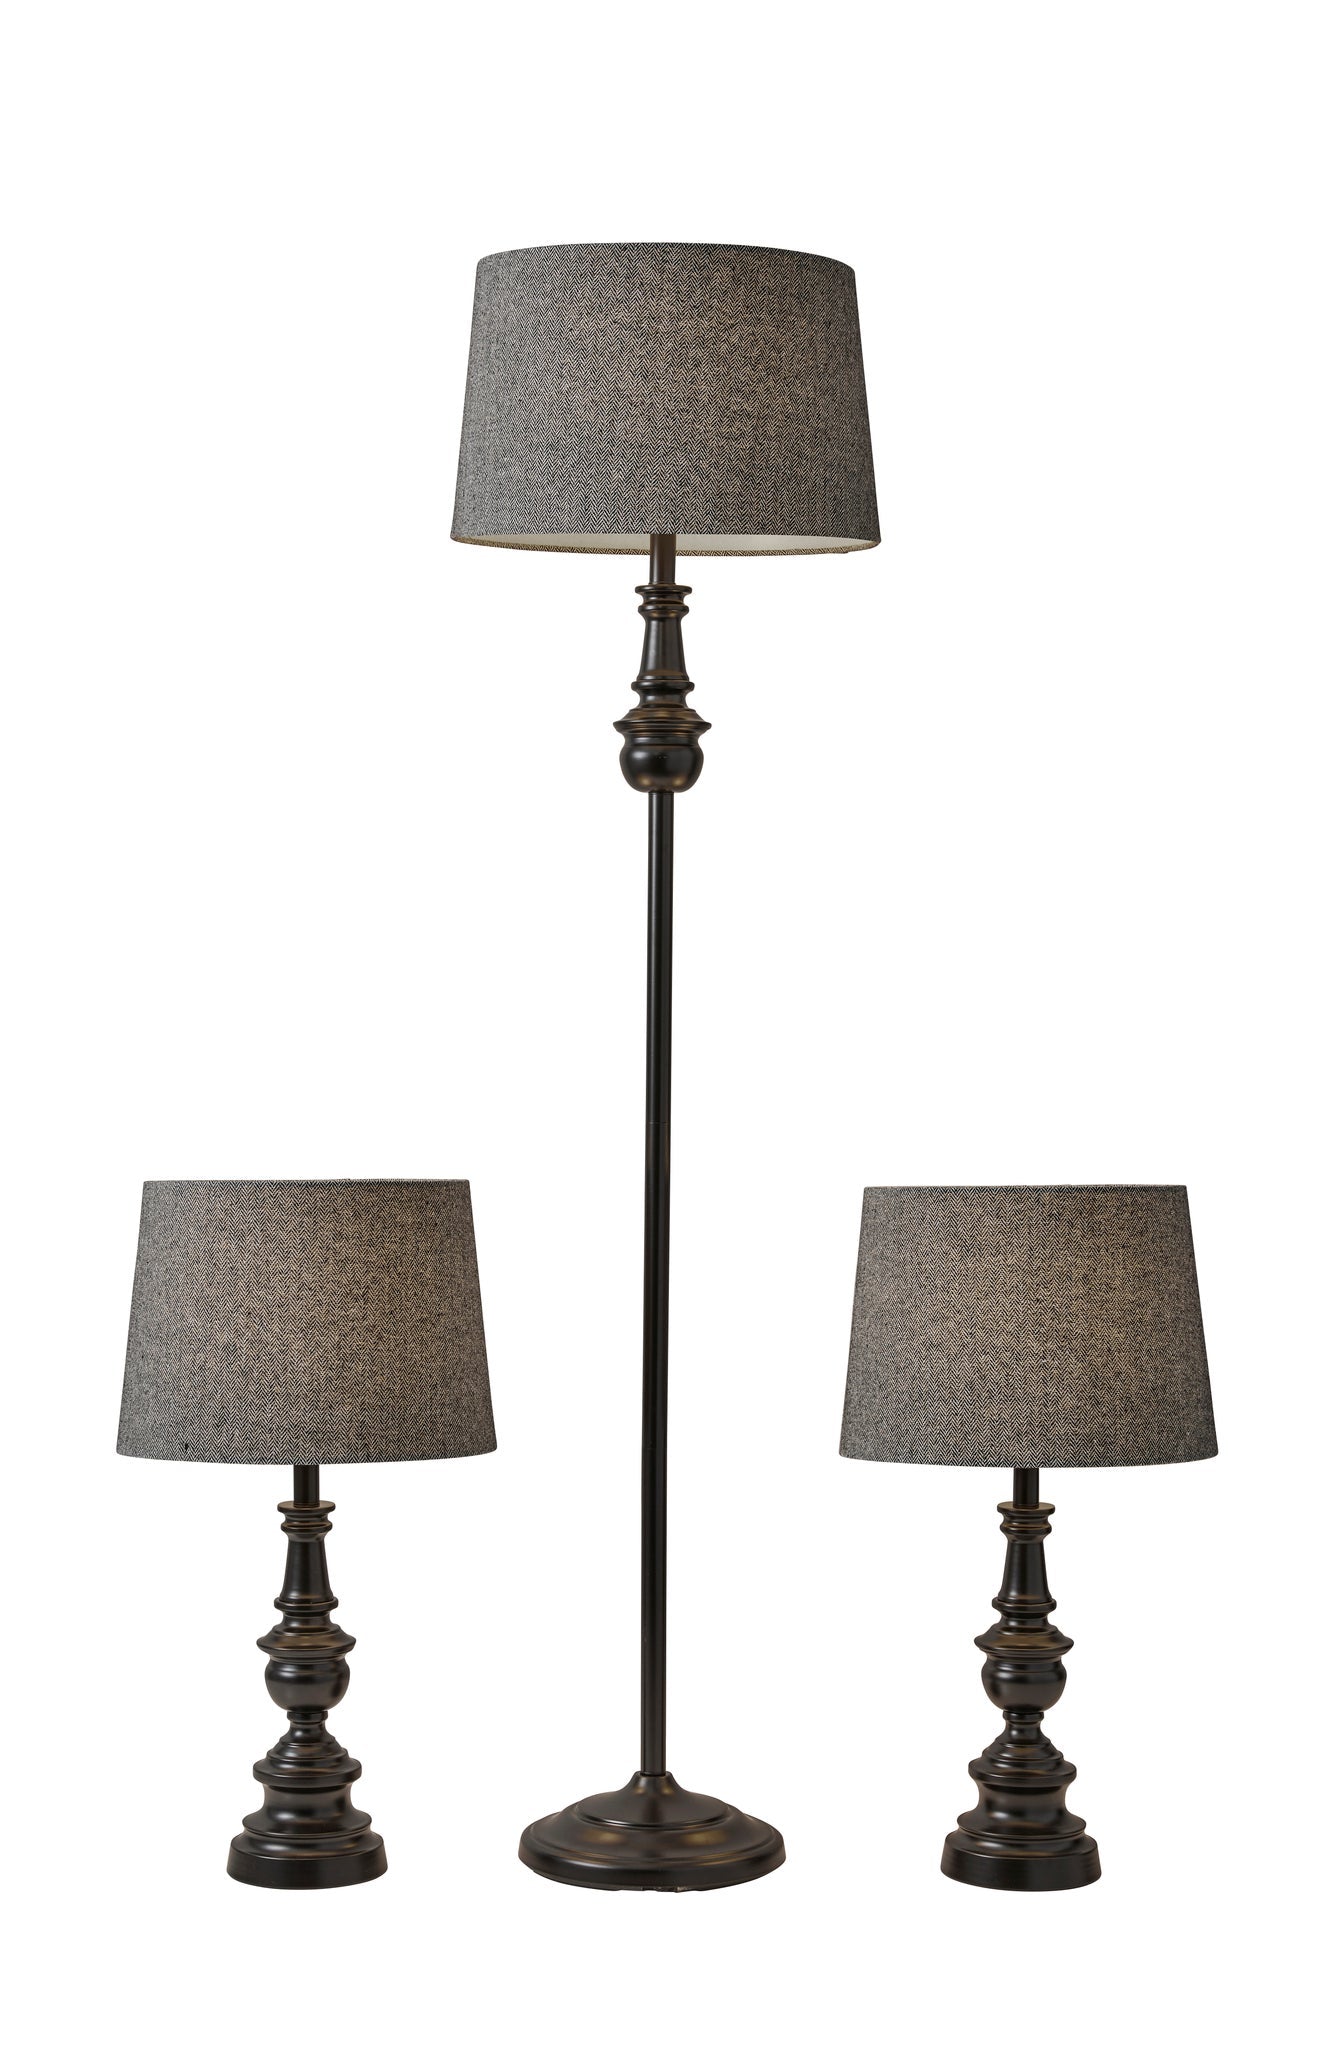 Adesso Table Lamps - Chandler 3 Piece Floor and Table Lamp Set Dark Bronze